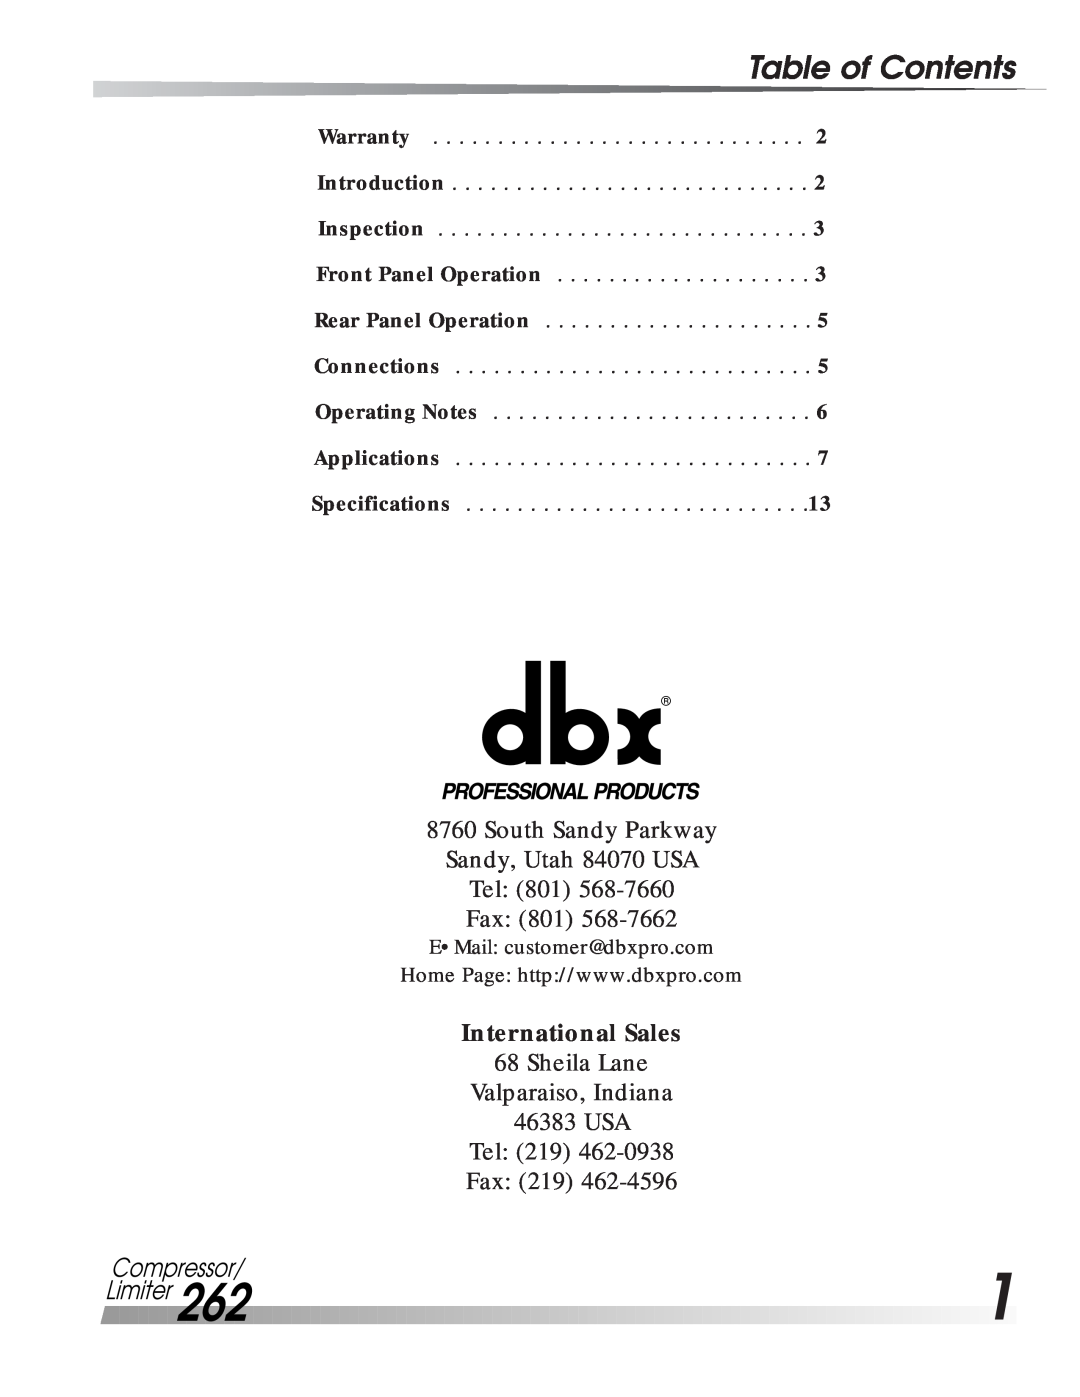 dbx Pro Table of Contents, Compressor Limiter2621, South Sandy Parkway Sandy, Utah 84070 USA, Tel 801 Fax, Tel 219 Fax 